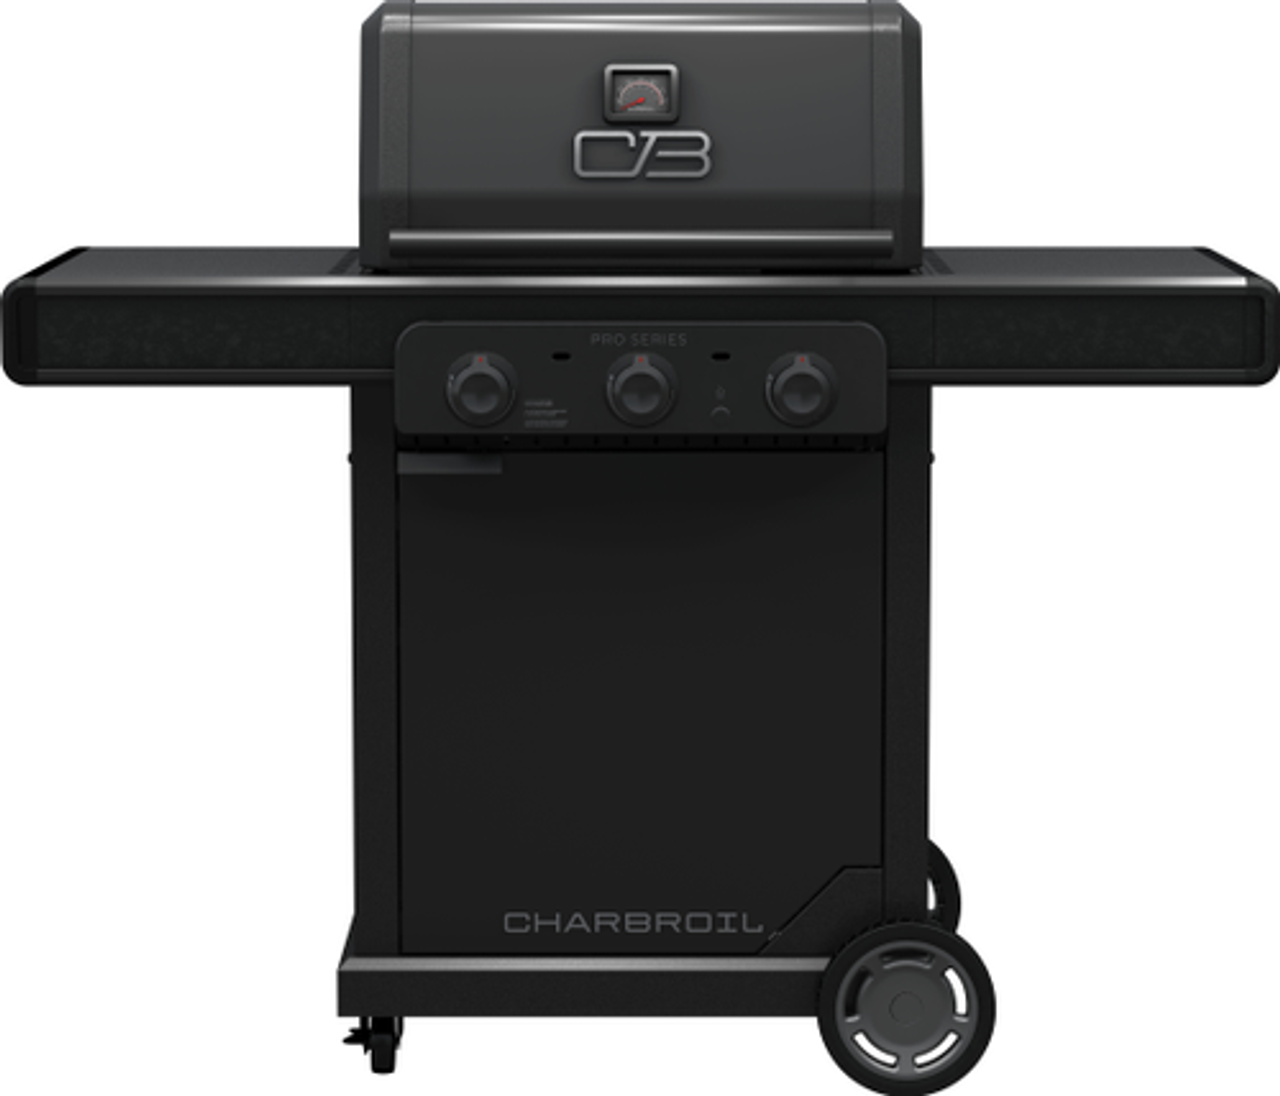 Char-Broil - Pro Series with Amplifire™ Infrared Technology 3-Burner Propane Gas Grill Cabinet, 463365124 - Black